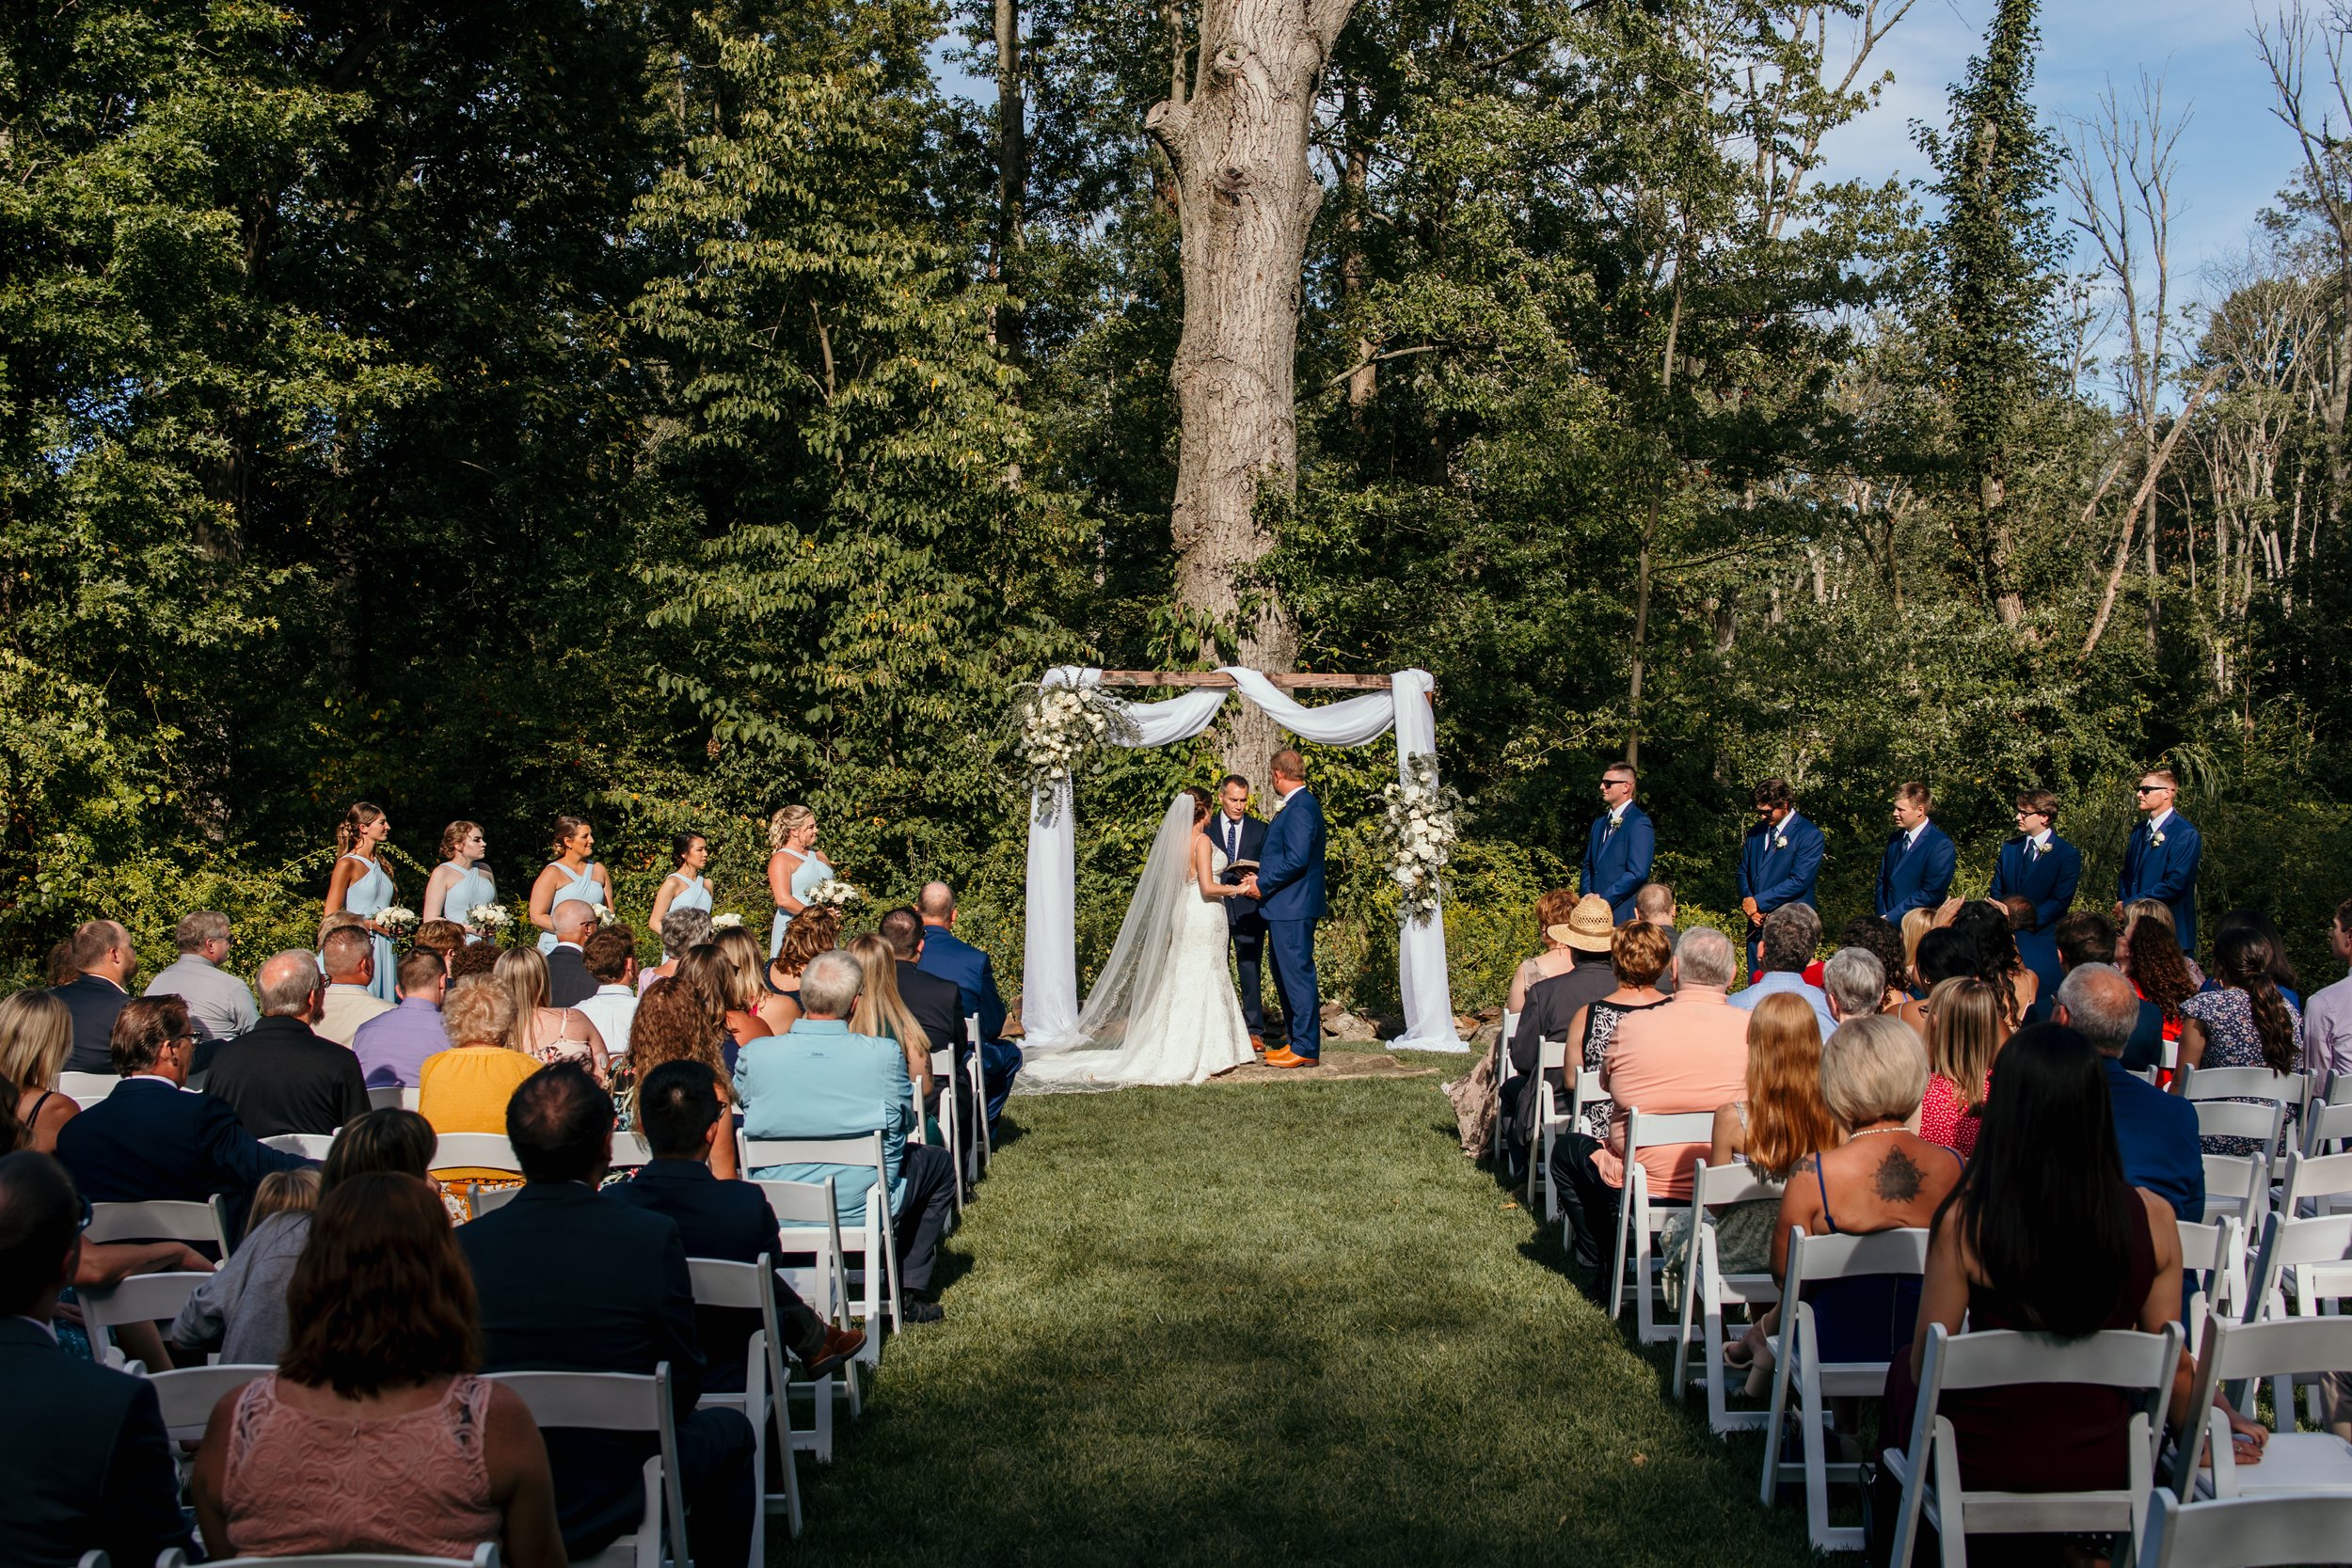 A outdoor wedding ceremony and brandywine manor house.